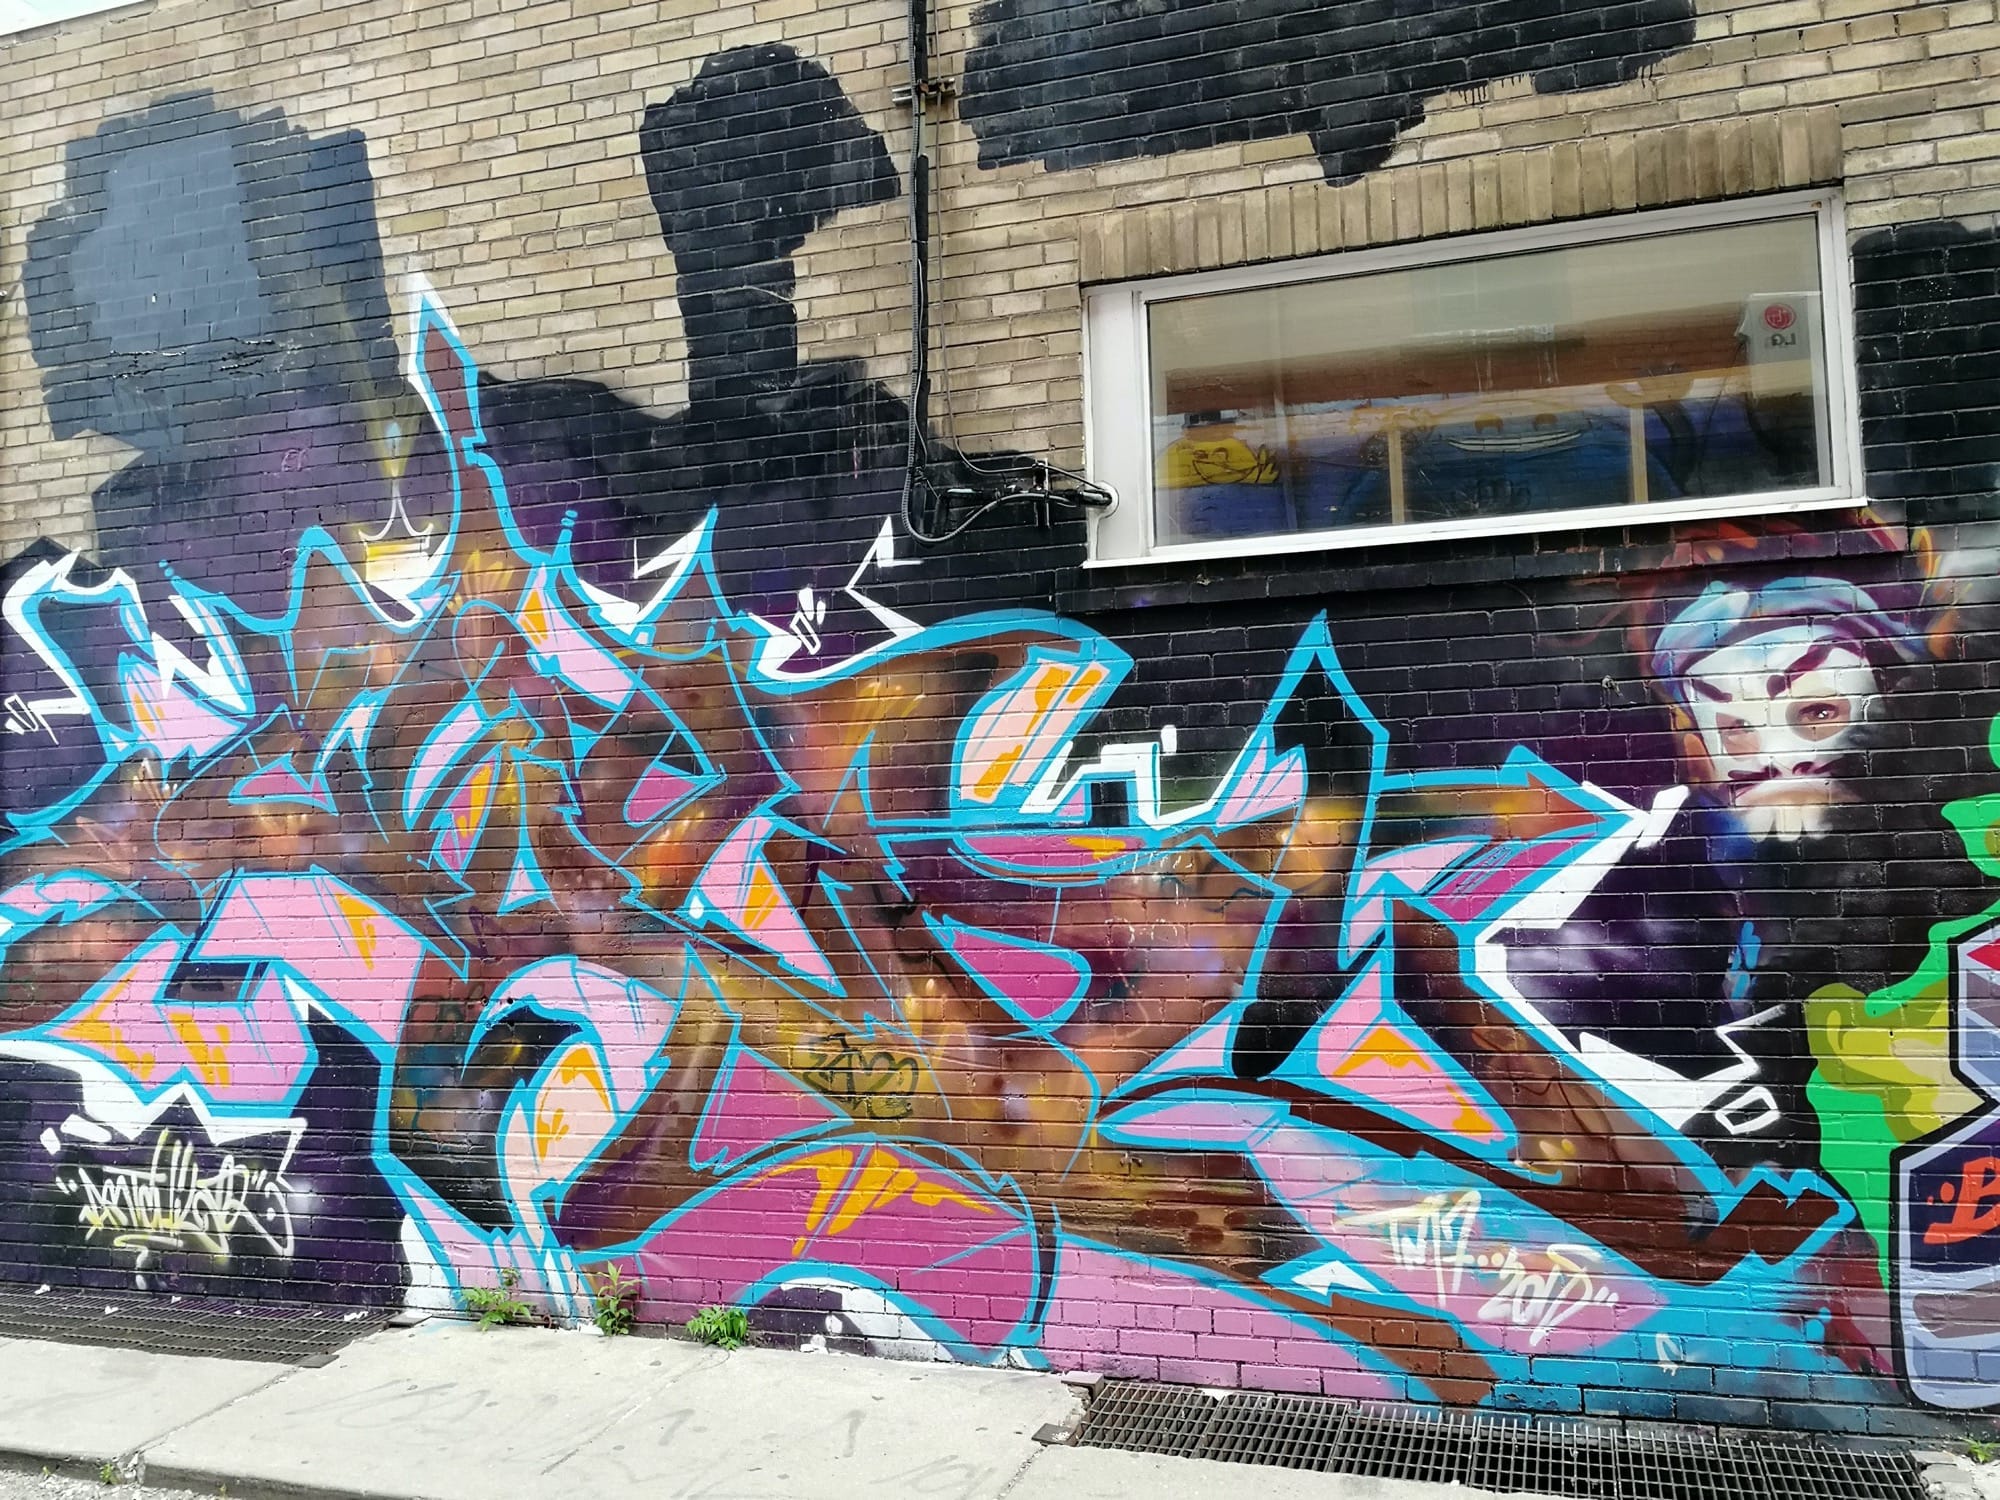 Graffiti 2566  captured by Rabot in Toronto Canada